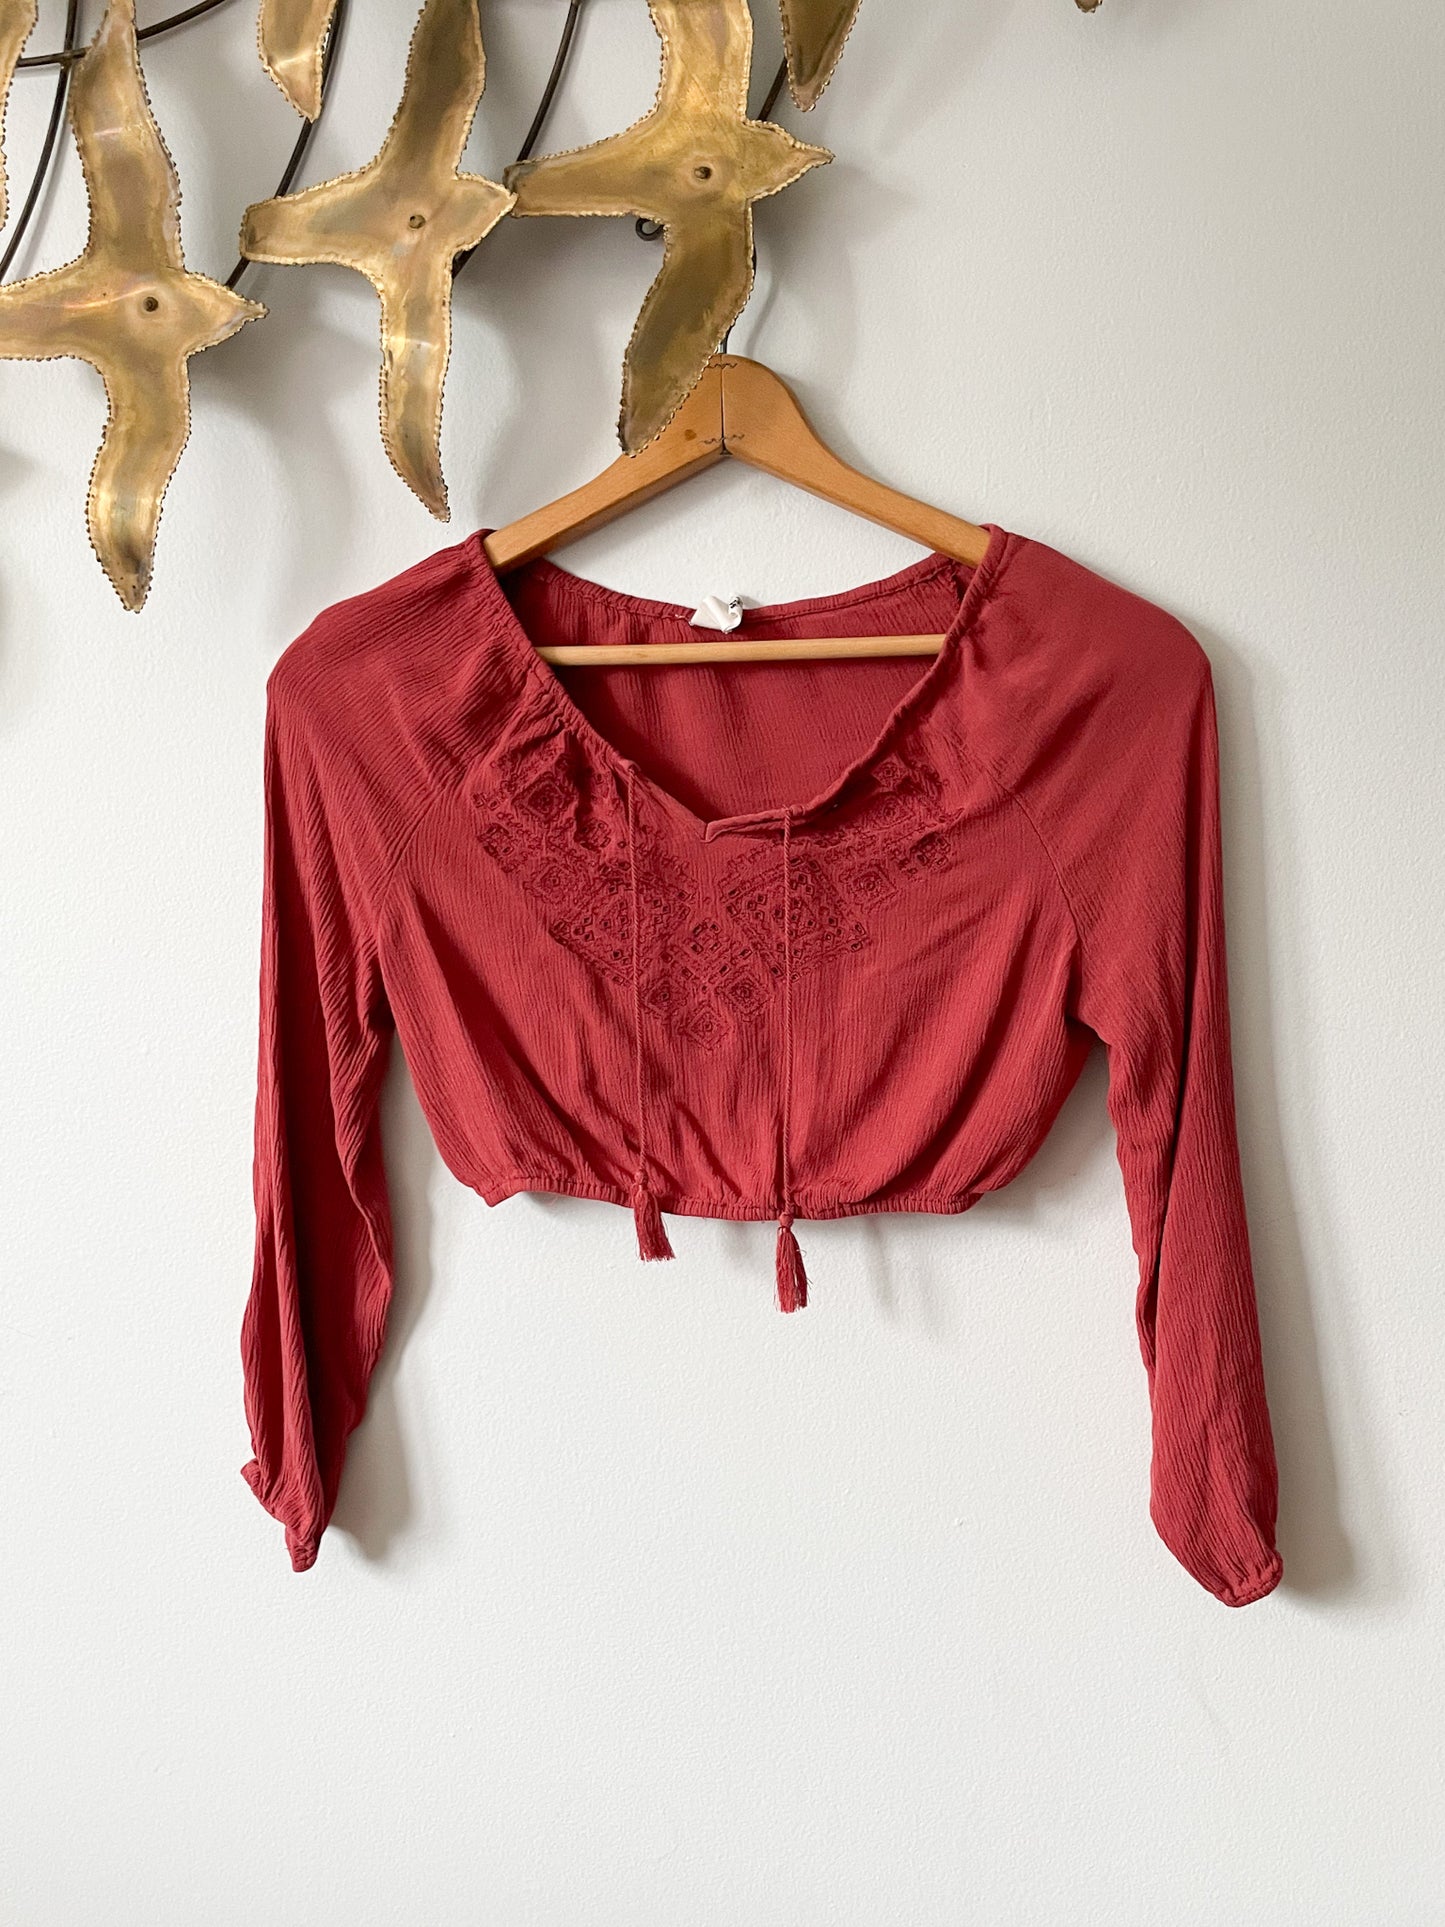 Tokyo Darling Rust Red Cropped Boho Tassel Embroidered Top - XS/S